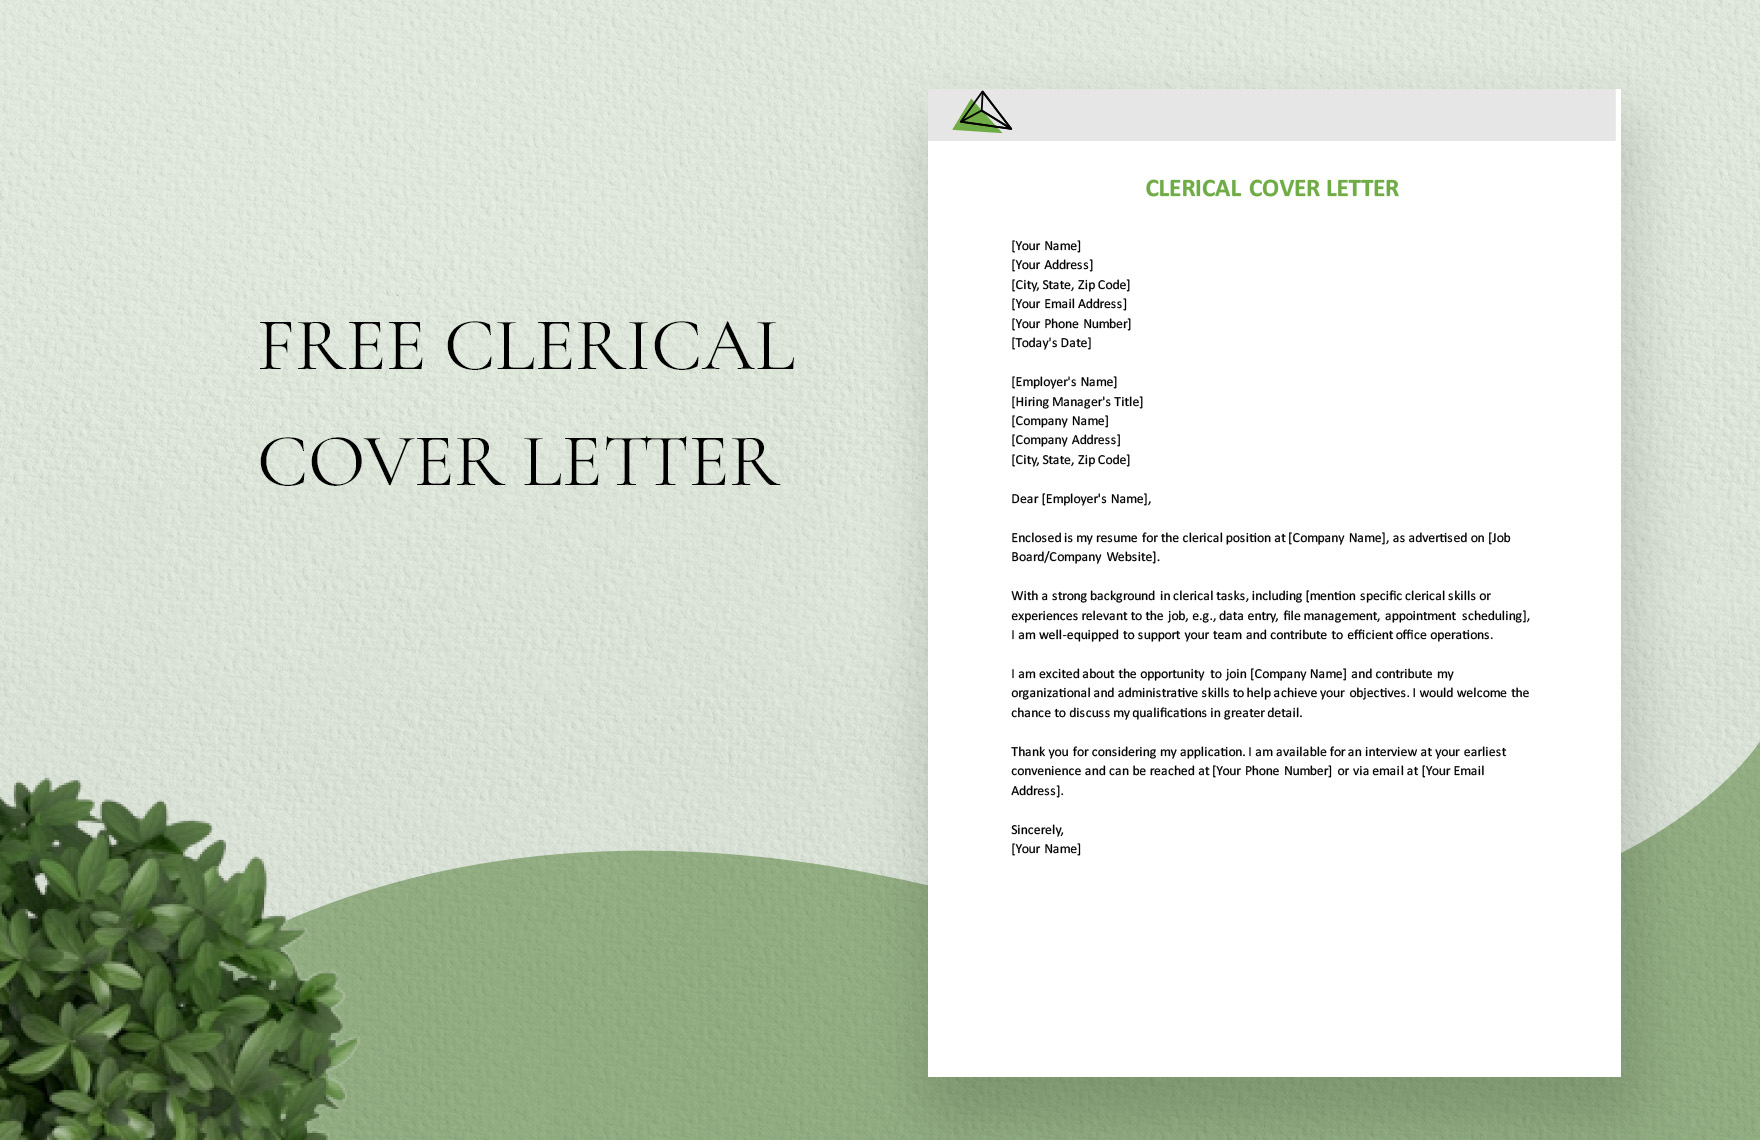 Clerical Cover Letter in Word, Google Docs, PDF